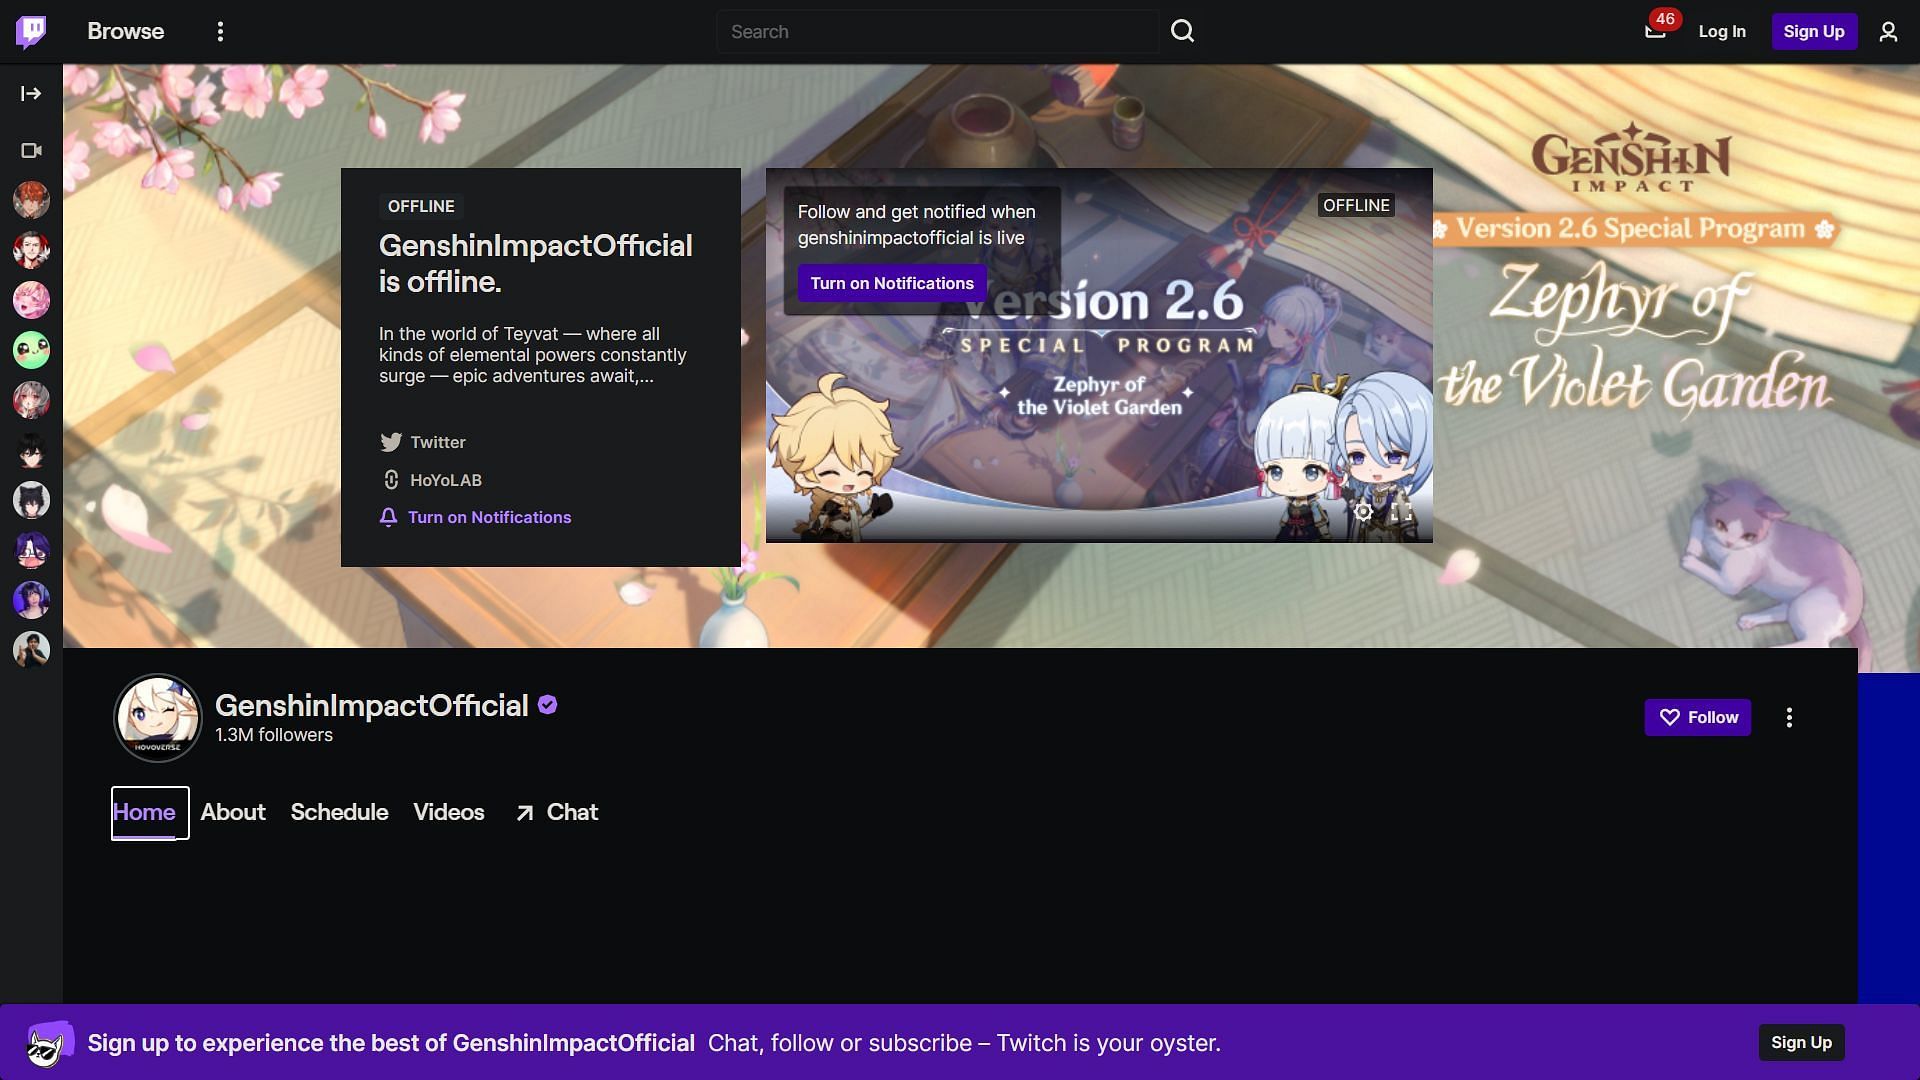 Official Twitch account (Image via Twitch/genshinimpactofficial)